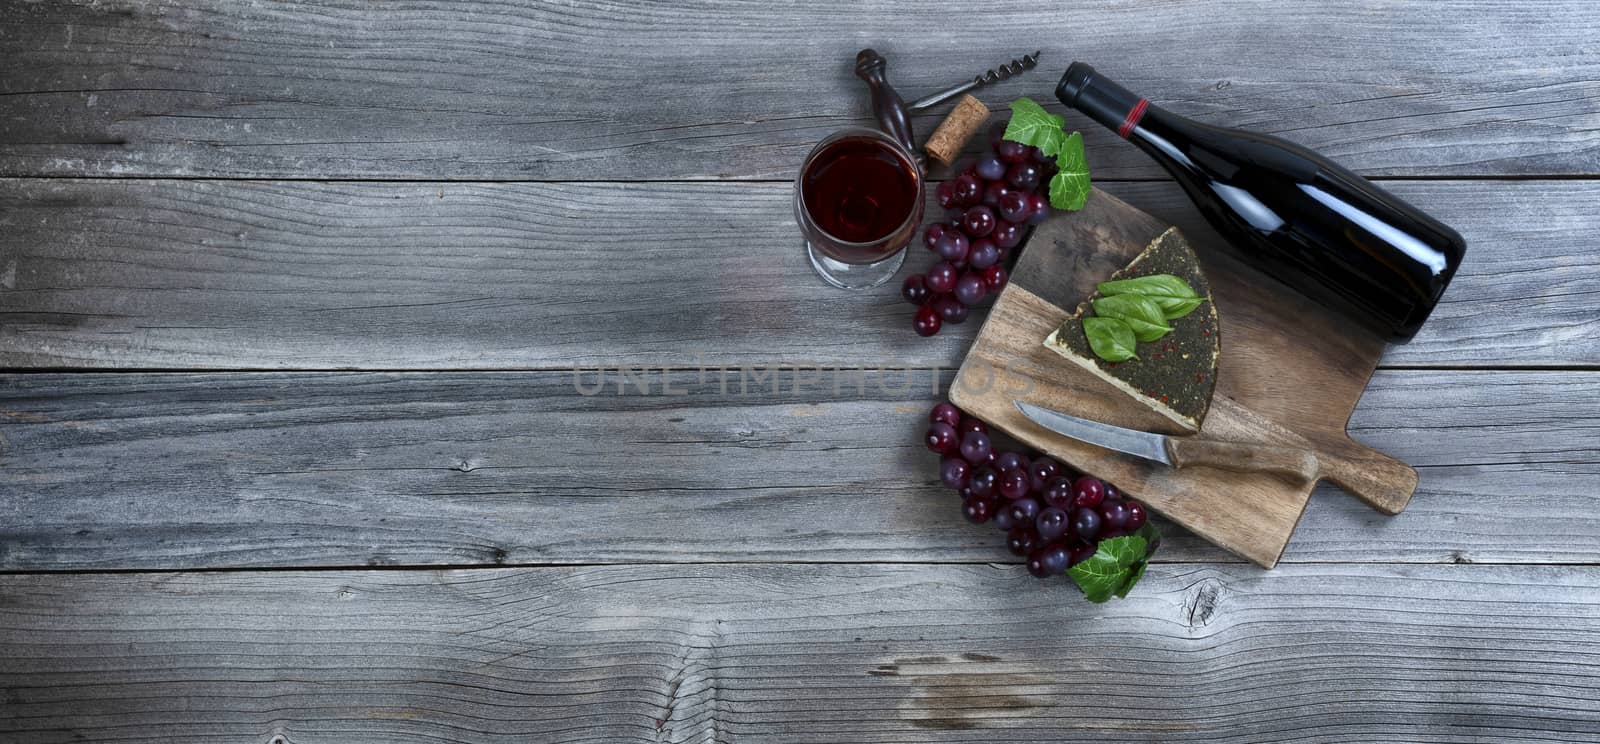 Red wine with fresh cheese wedge plus basil leaves and grapes on rustic wood with copy space available 